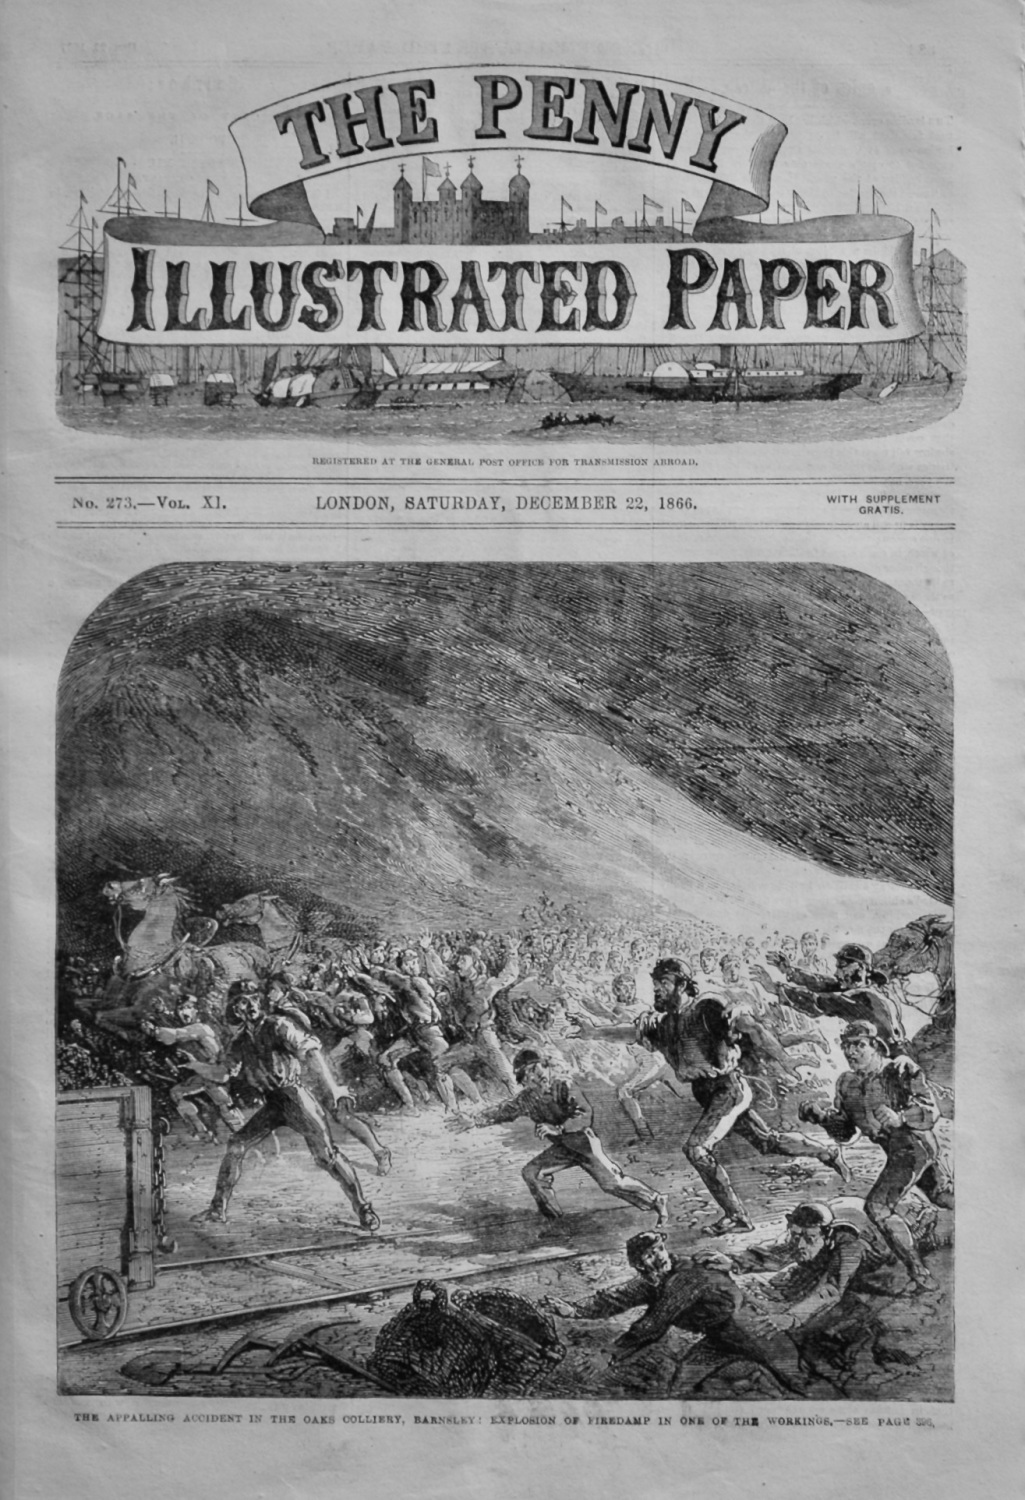 The Penny Illustrated Paper, December 22nd, 1866.